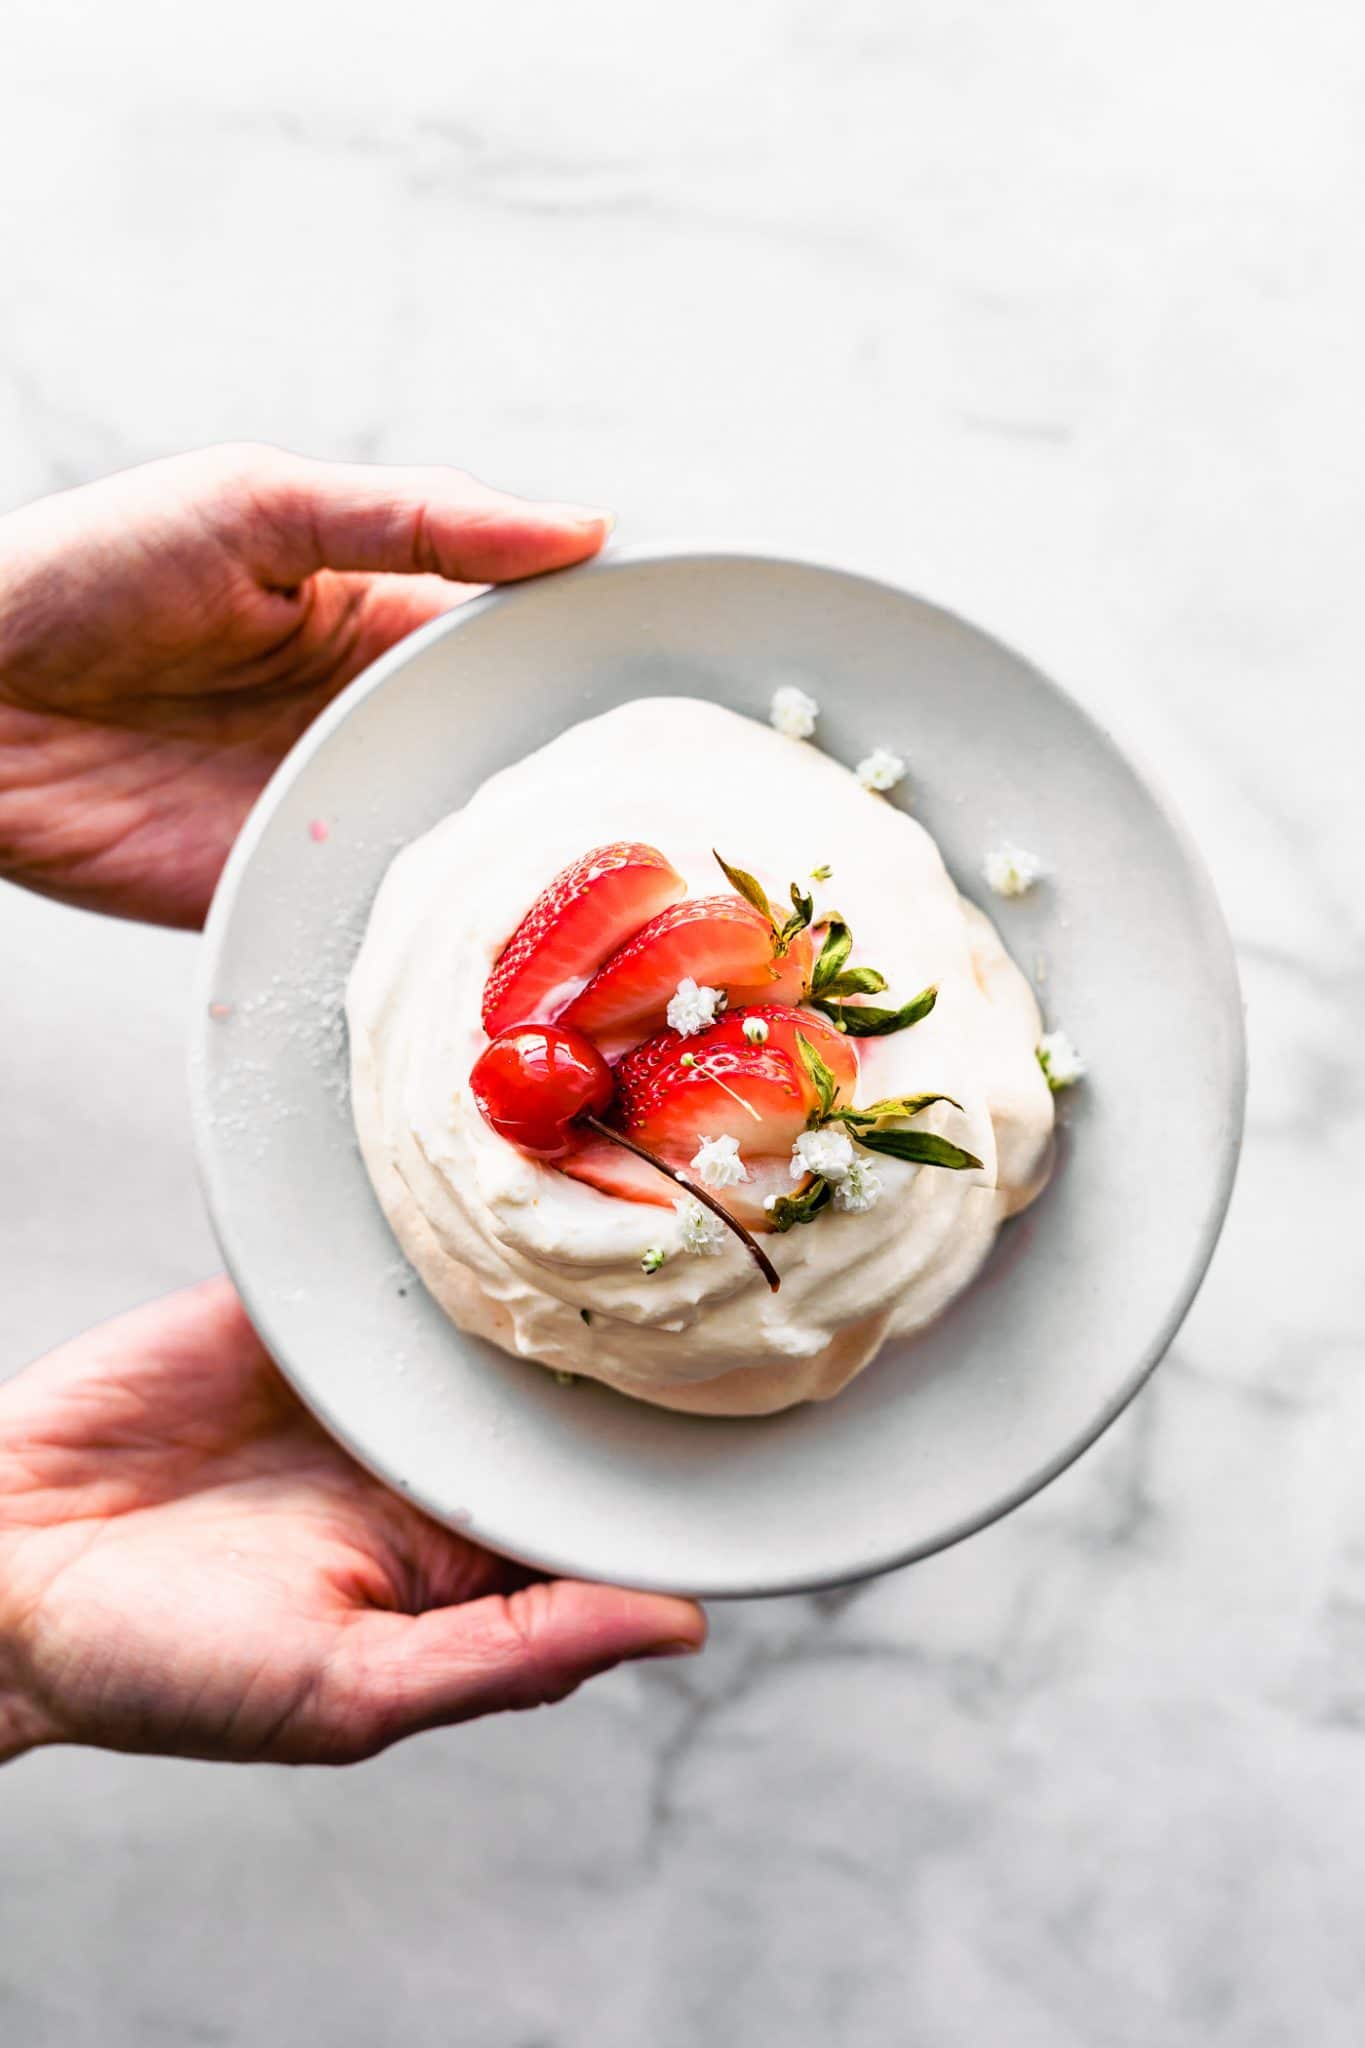 Overhead image of two hands holding a plate with a strawberry topped pavlova.